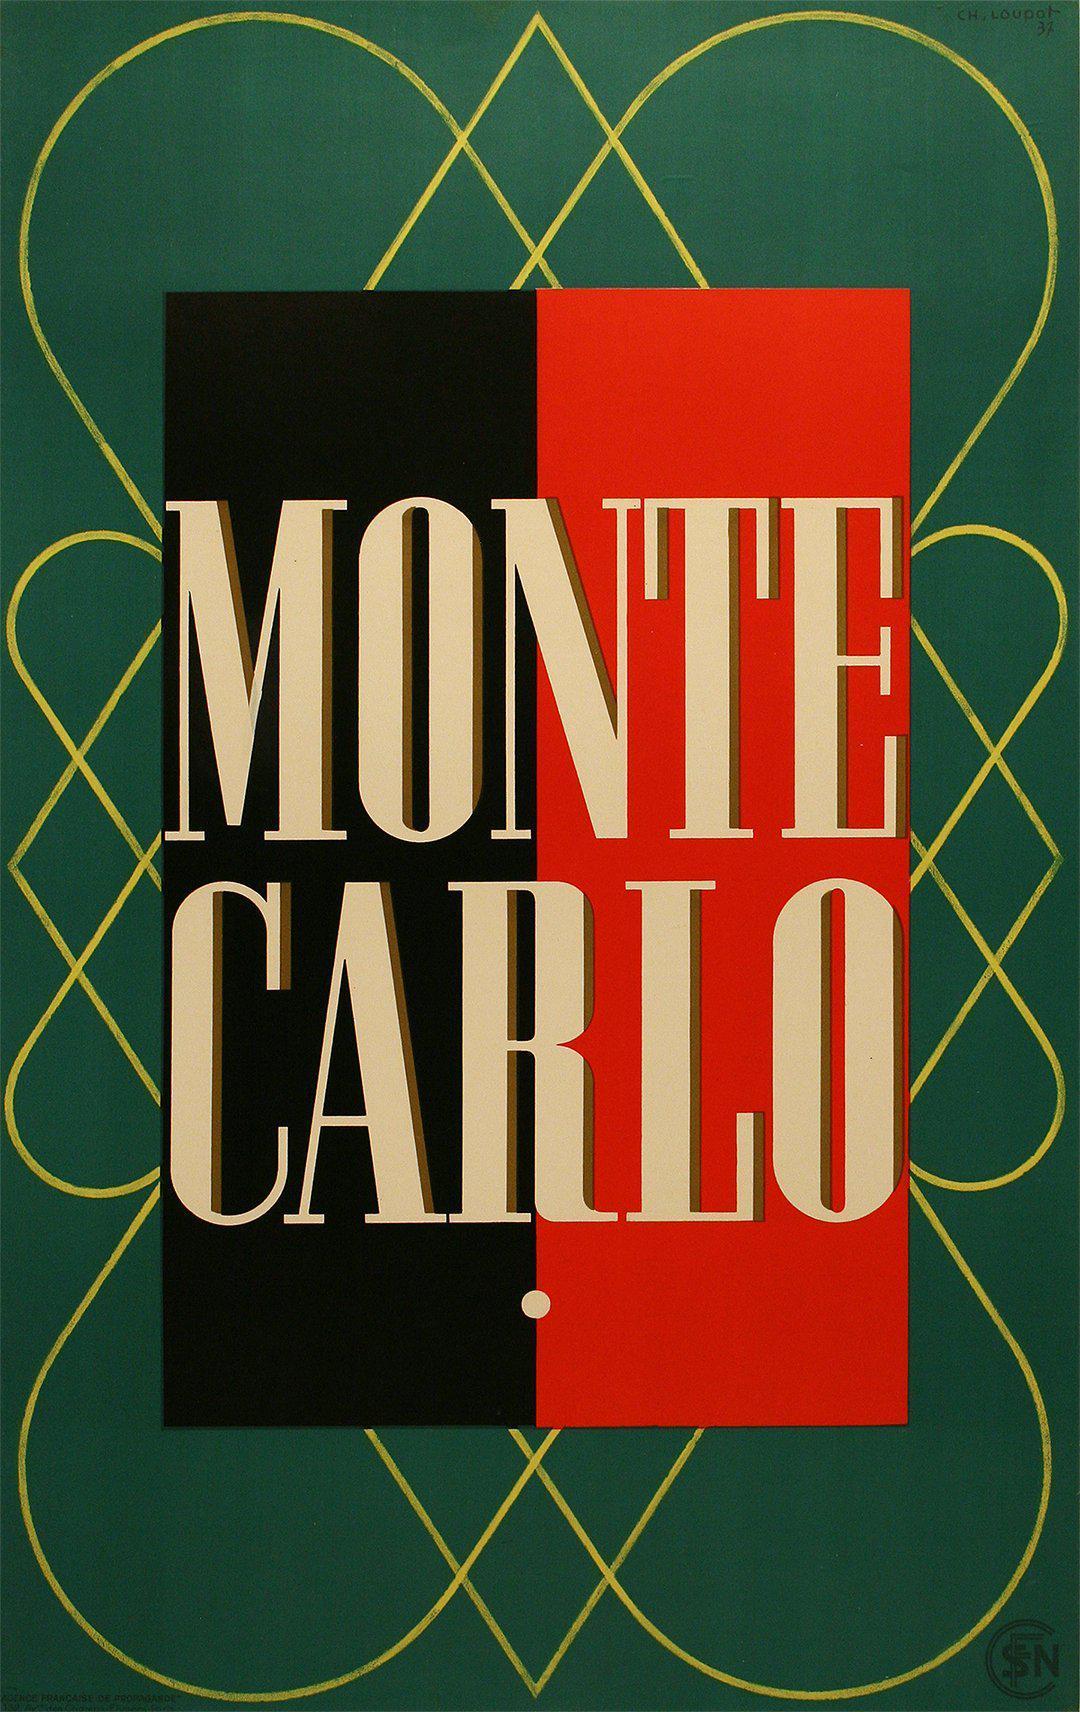 Original Vintage Monte Carlo Casino Poster by Charles Loupot 1937 Art Deco